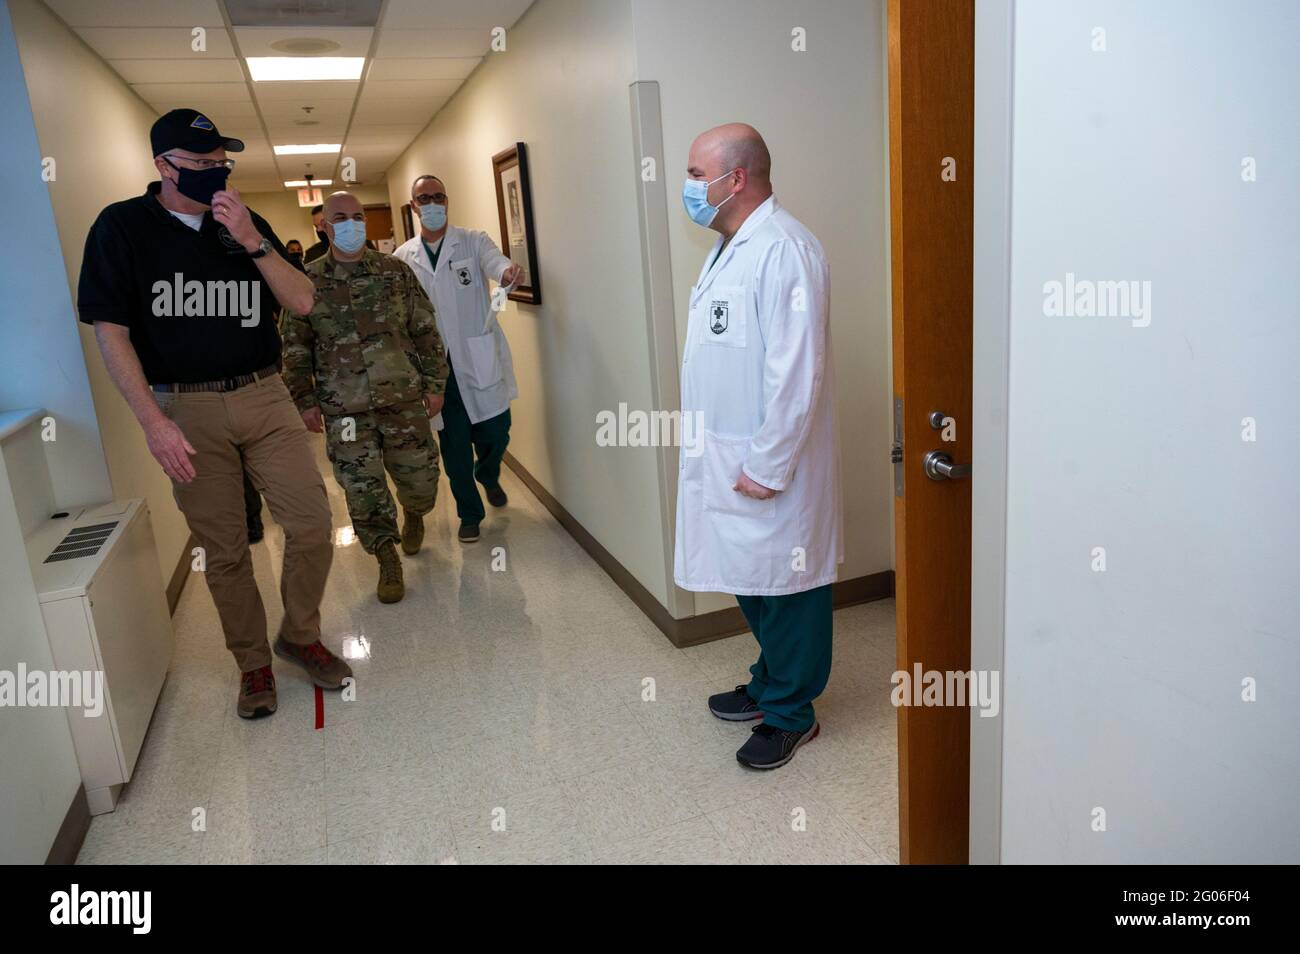 Reportage:  Acting Defense Secretary Chris Miller arrives for a COVID-19 vaccination, Walter Reed National Military Medical Center, Bethesda, Md., Dec. 14, 2020 Stock Photo